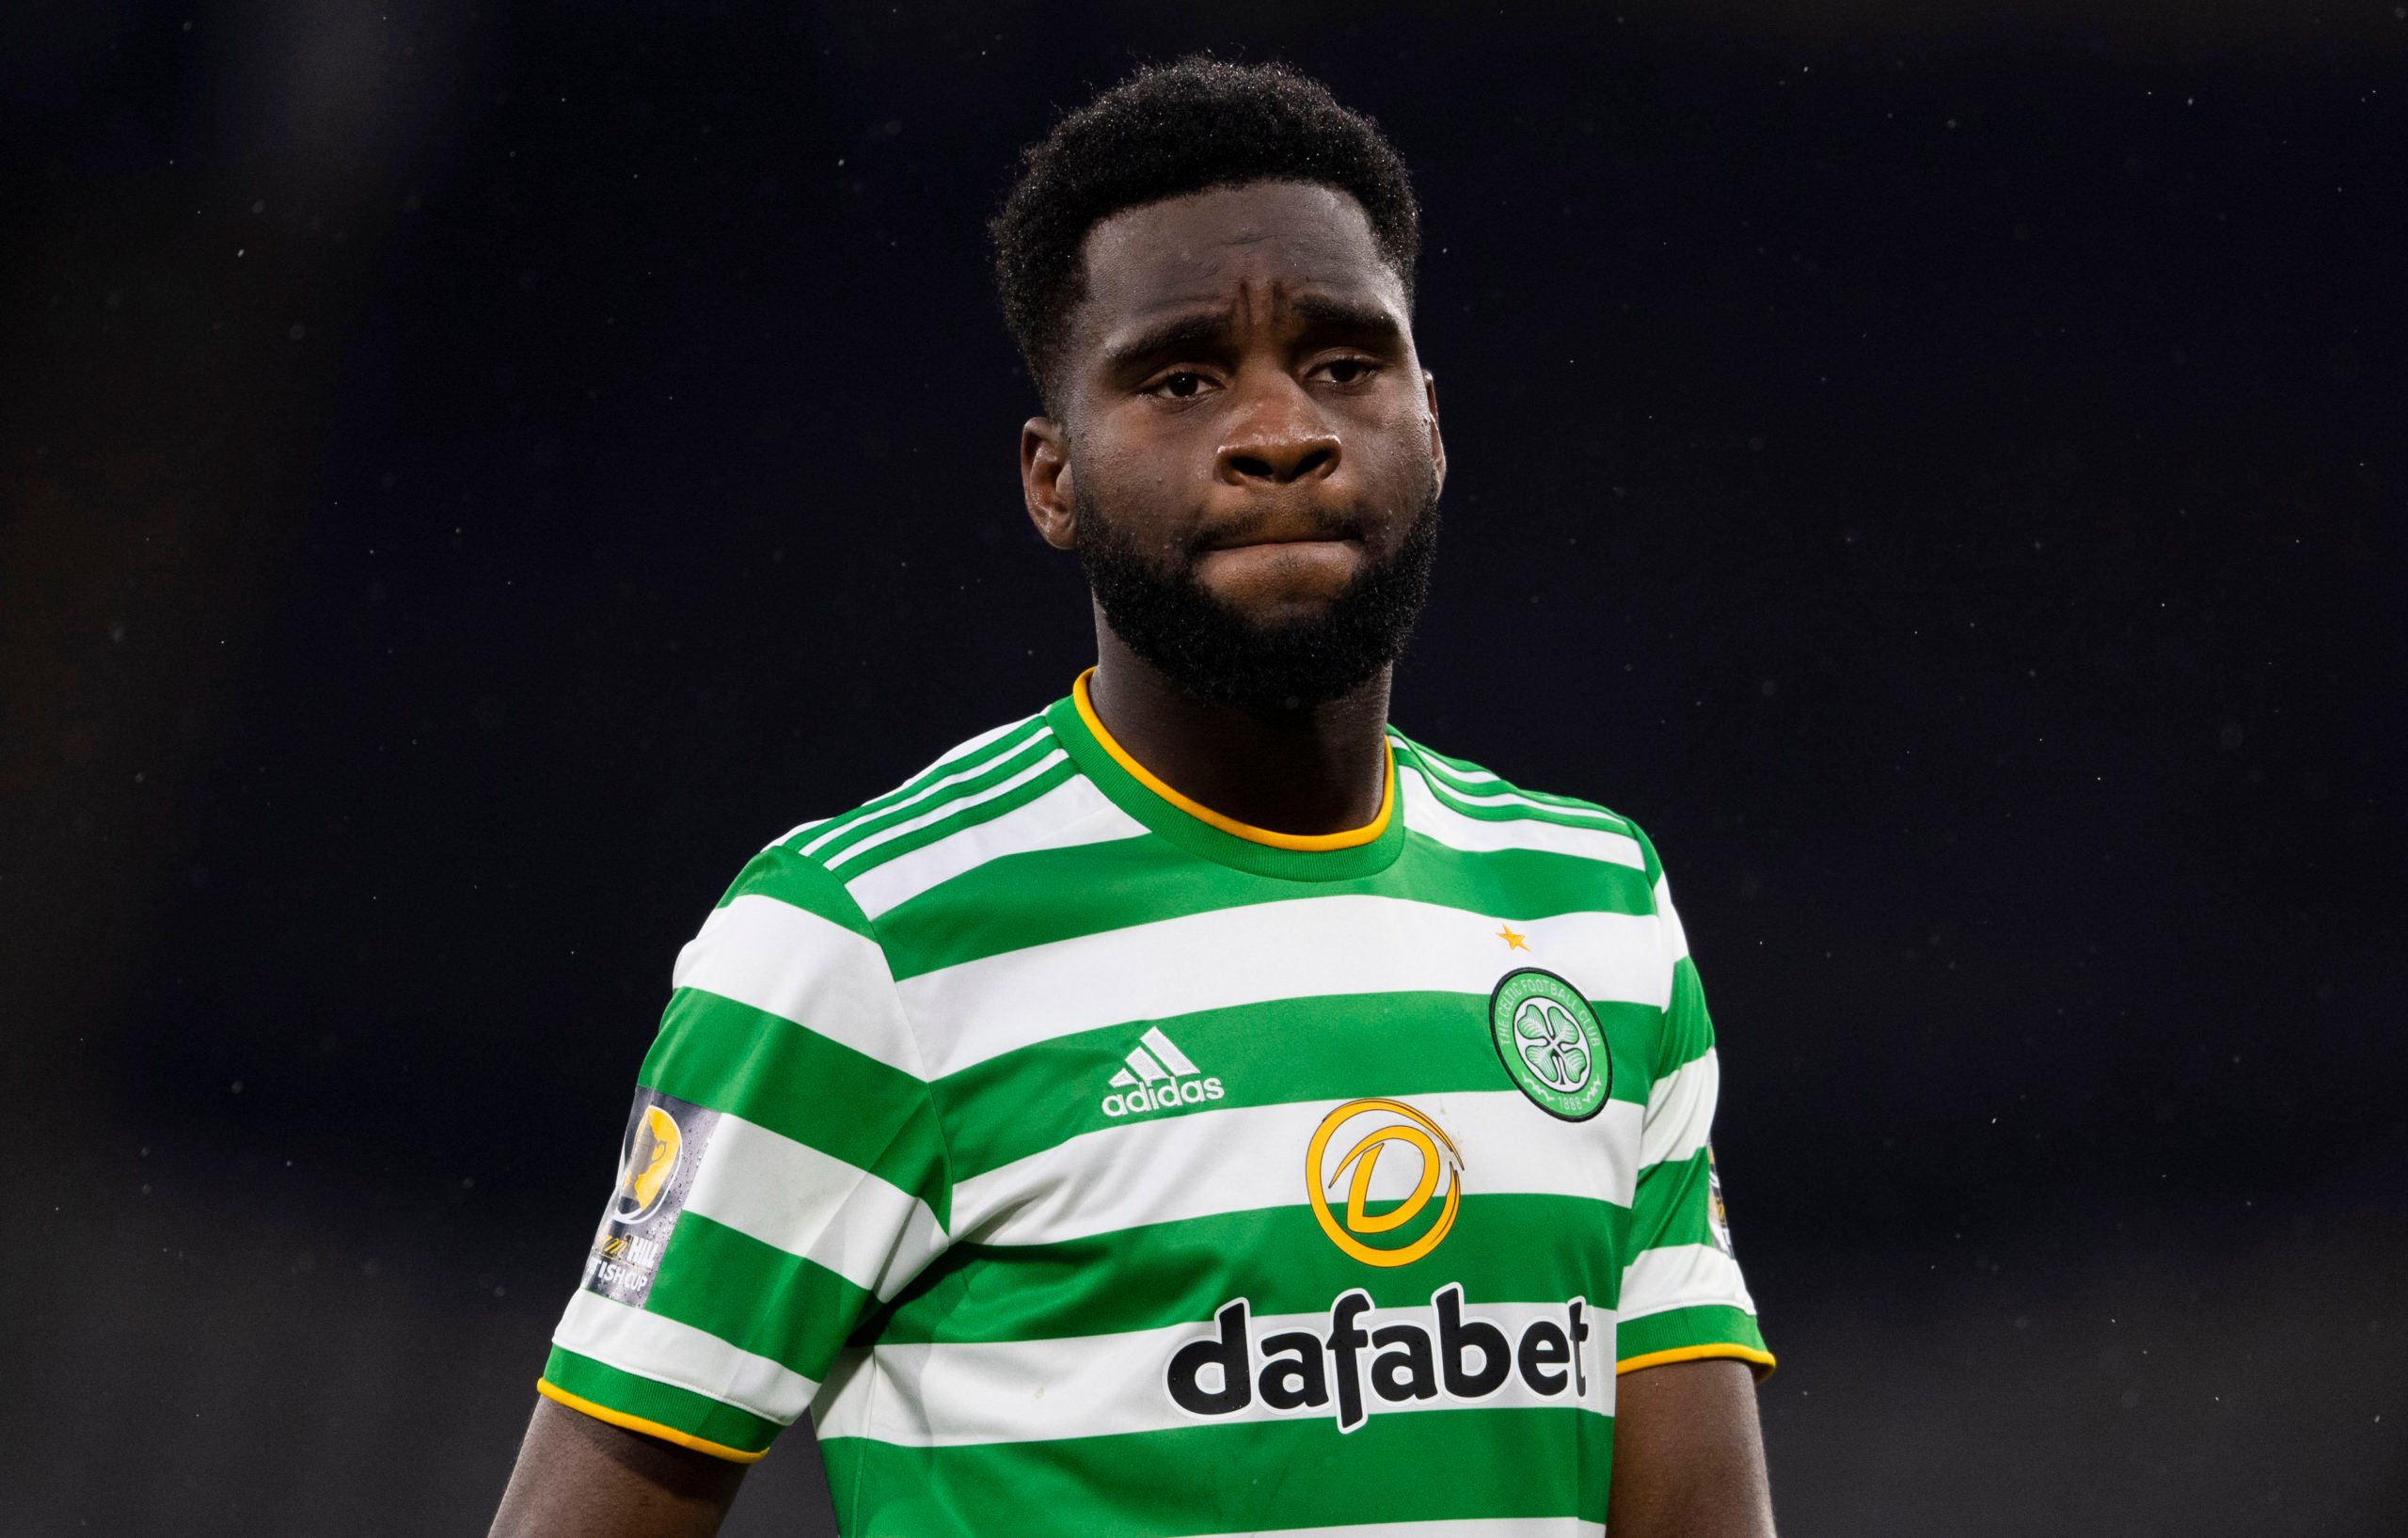 It's time for Celtic striker Odsonne Edouard to step up in Glasgow Derby